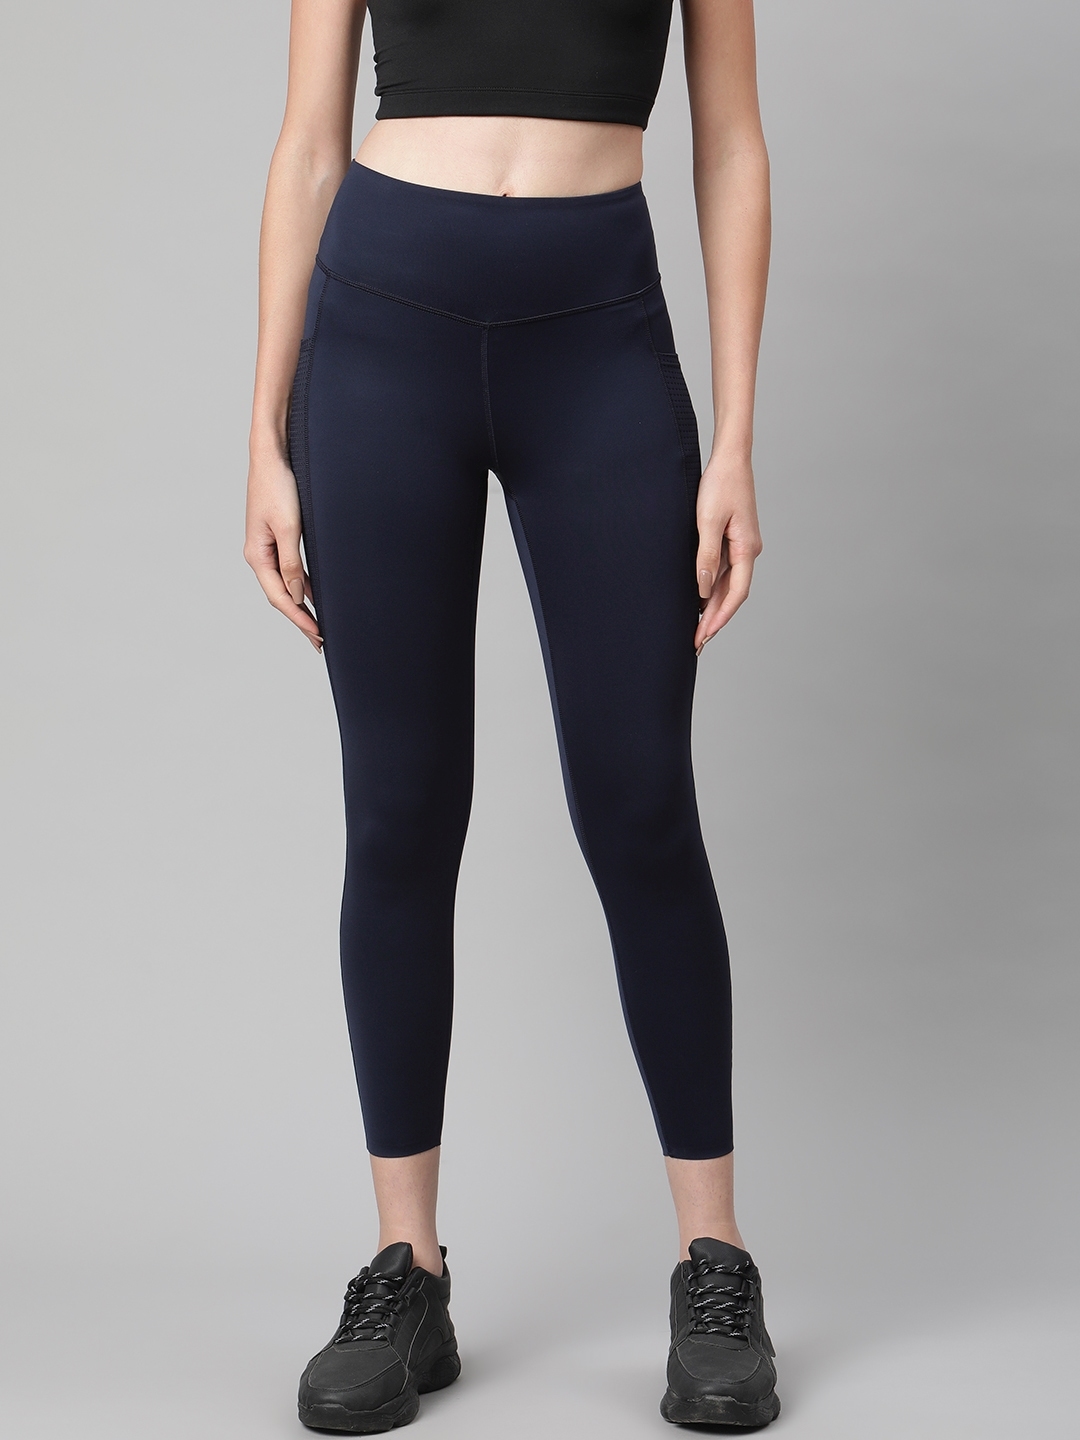 Marks & Spencer Women Navy Blue Solid Tights